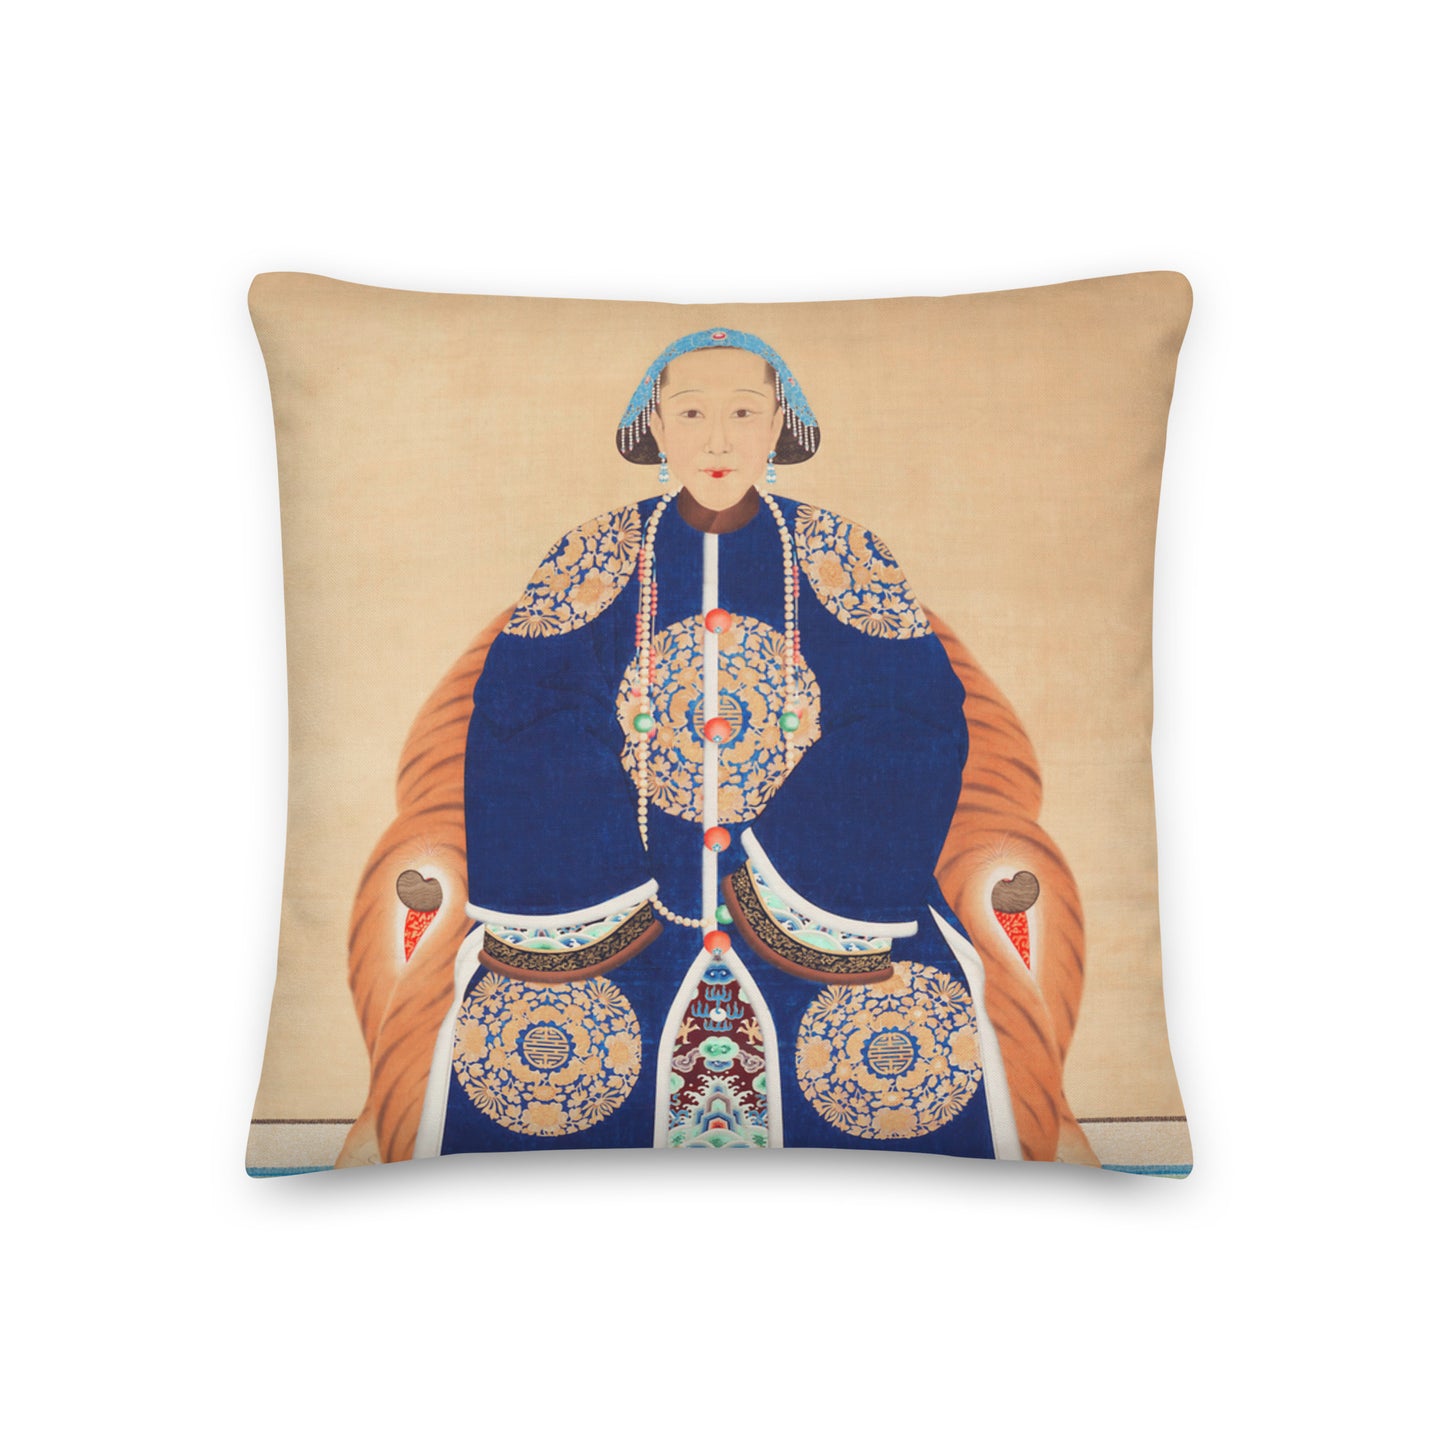 a Chinese woman wearing a headdress on a cushion cover